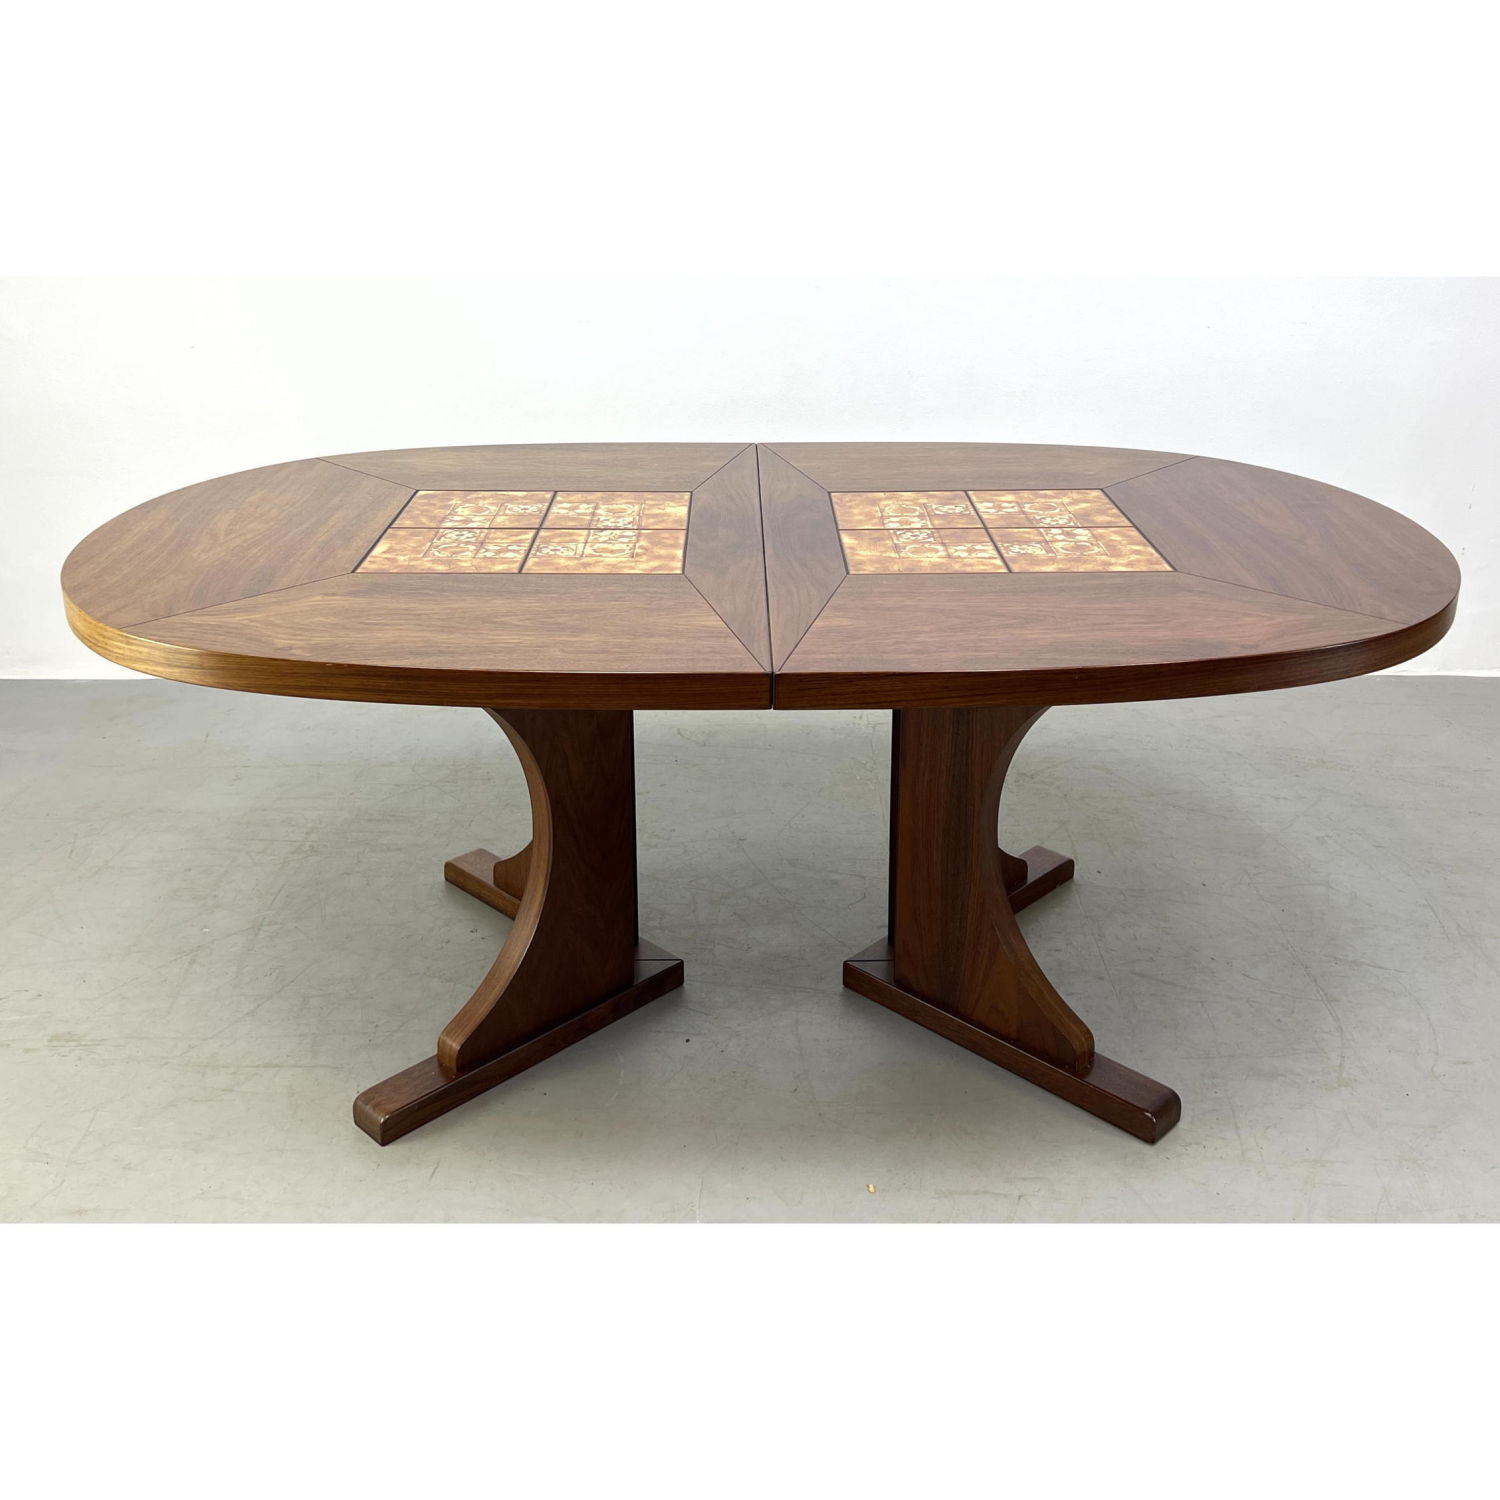 Rosewood and Tile Dining Table.